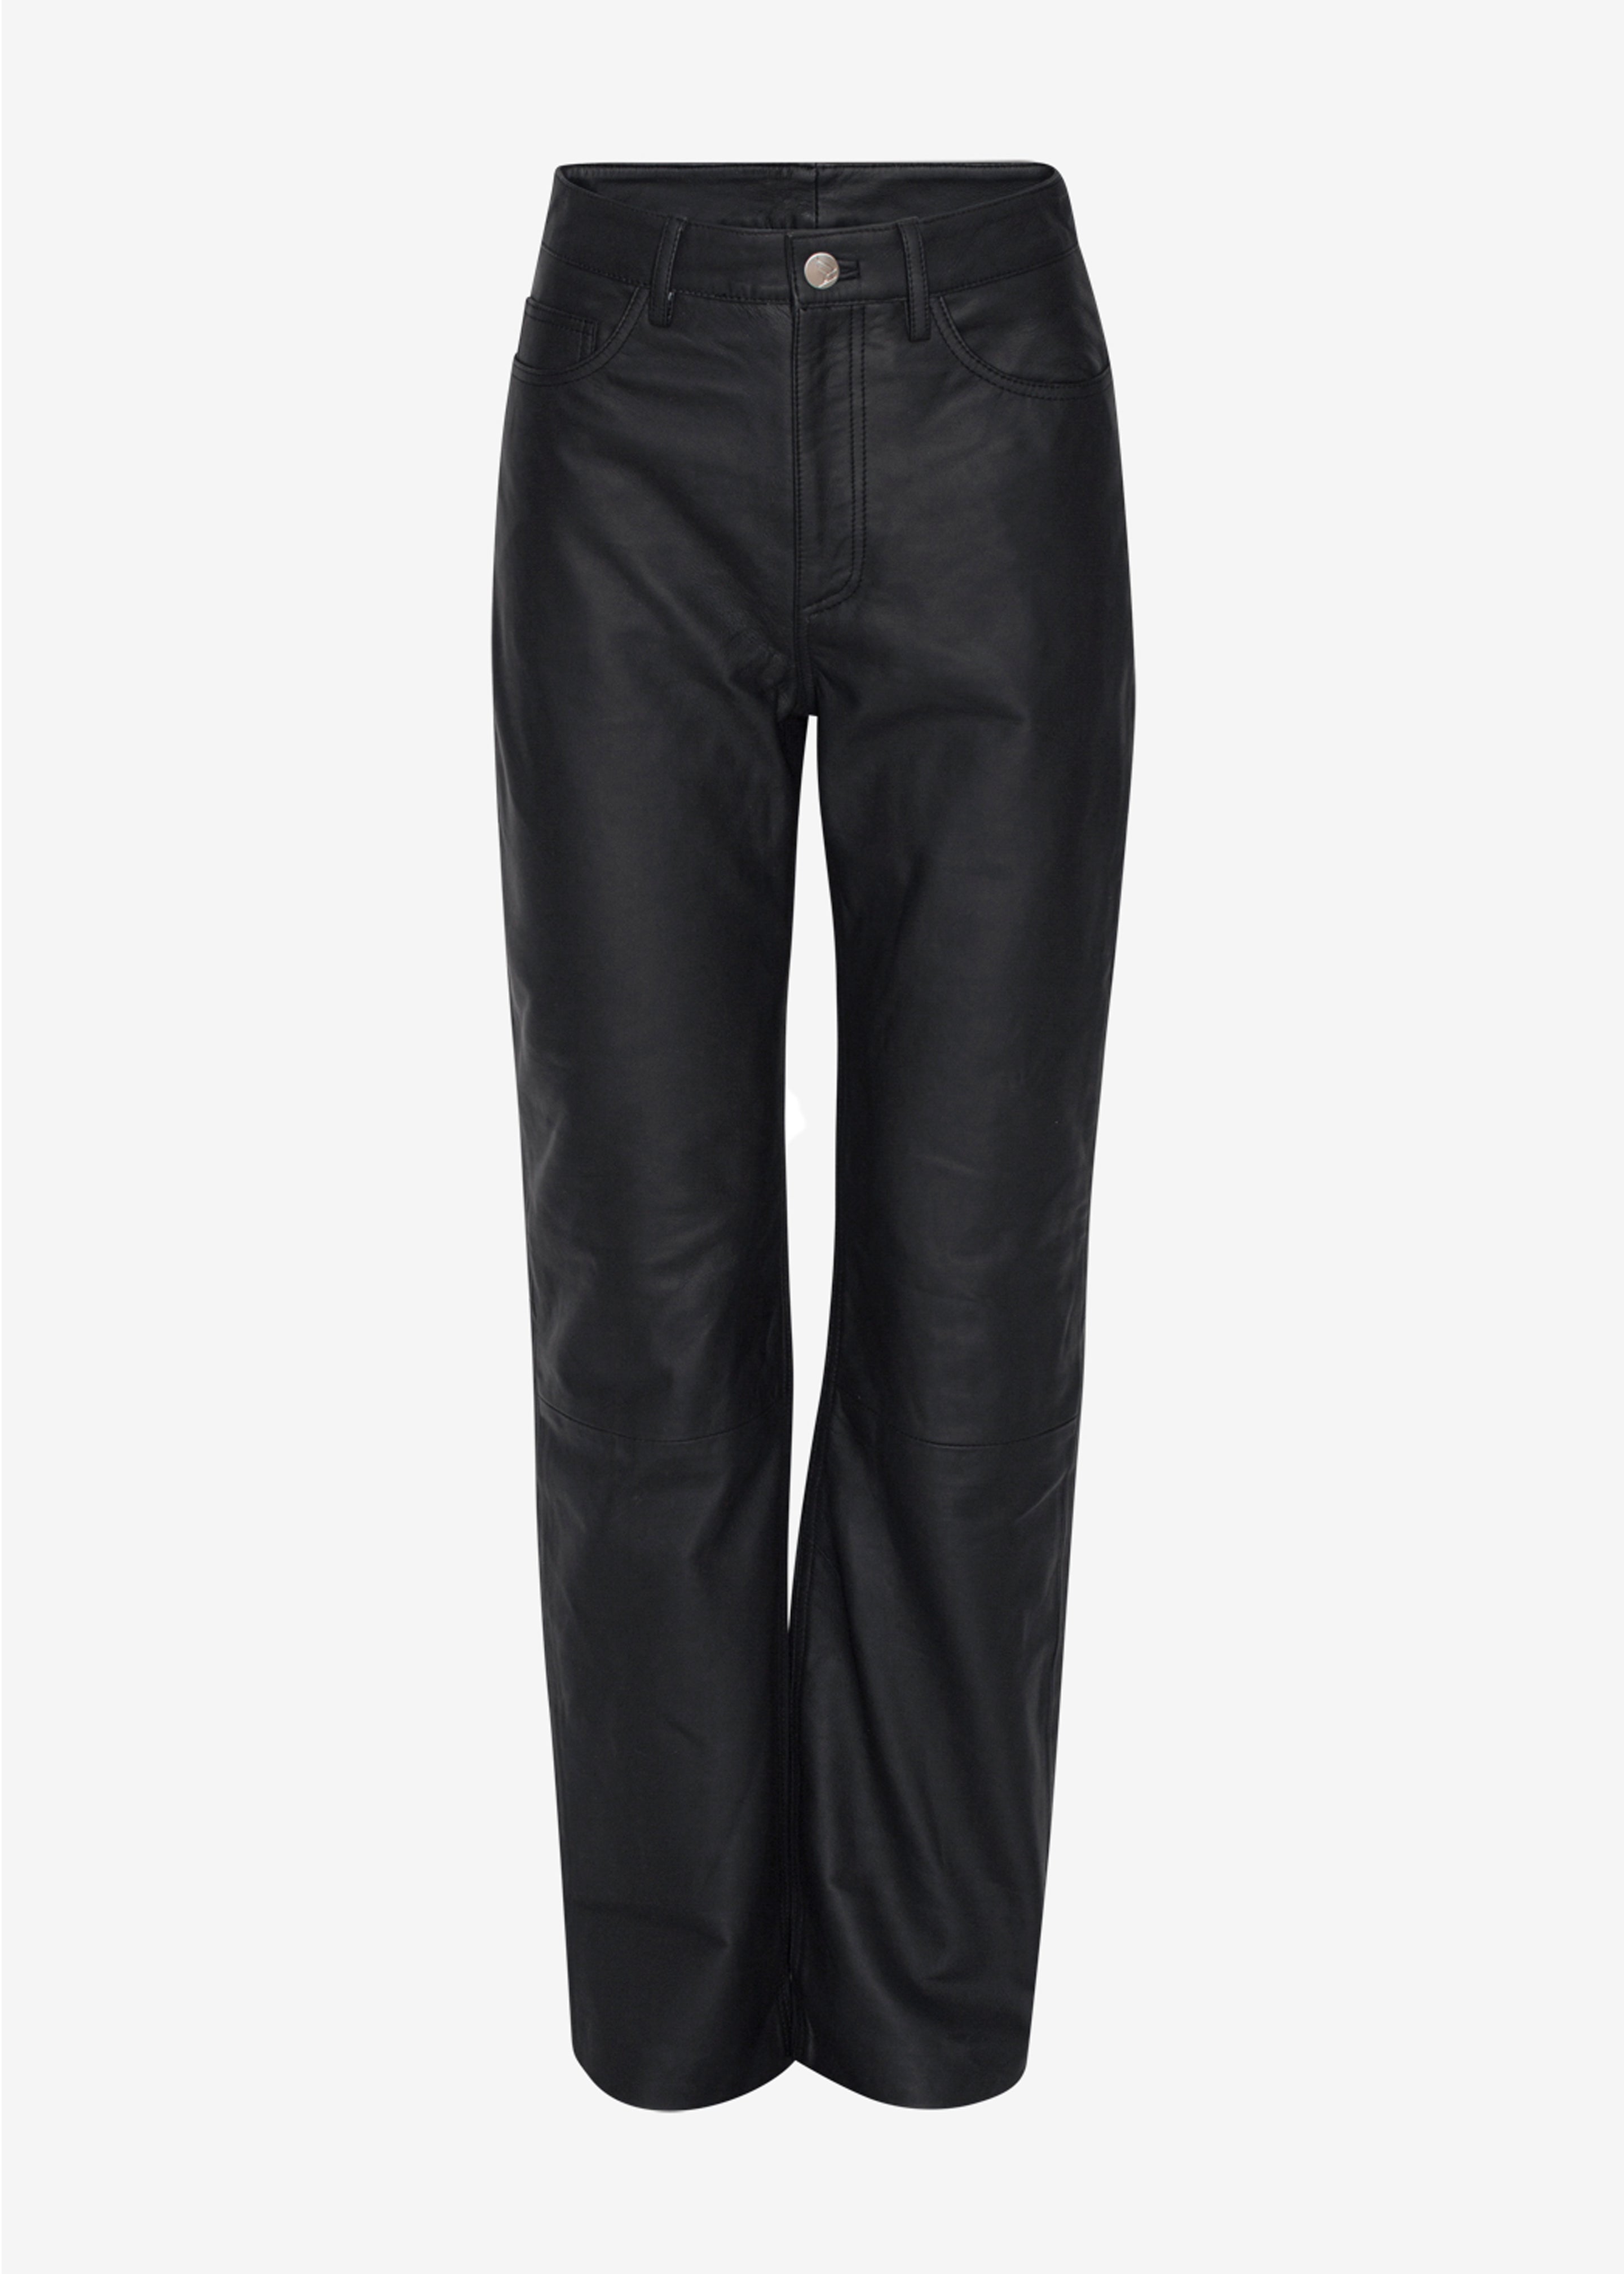 REMAIN Leather Straight Pants - Black - 8